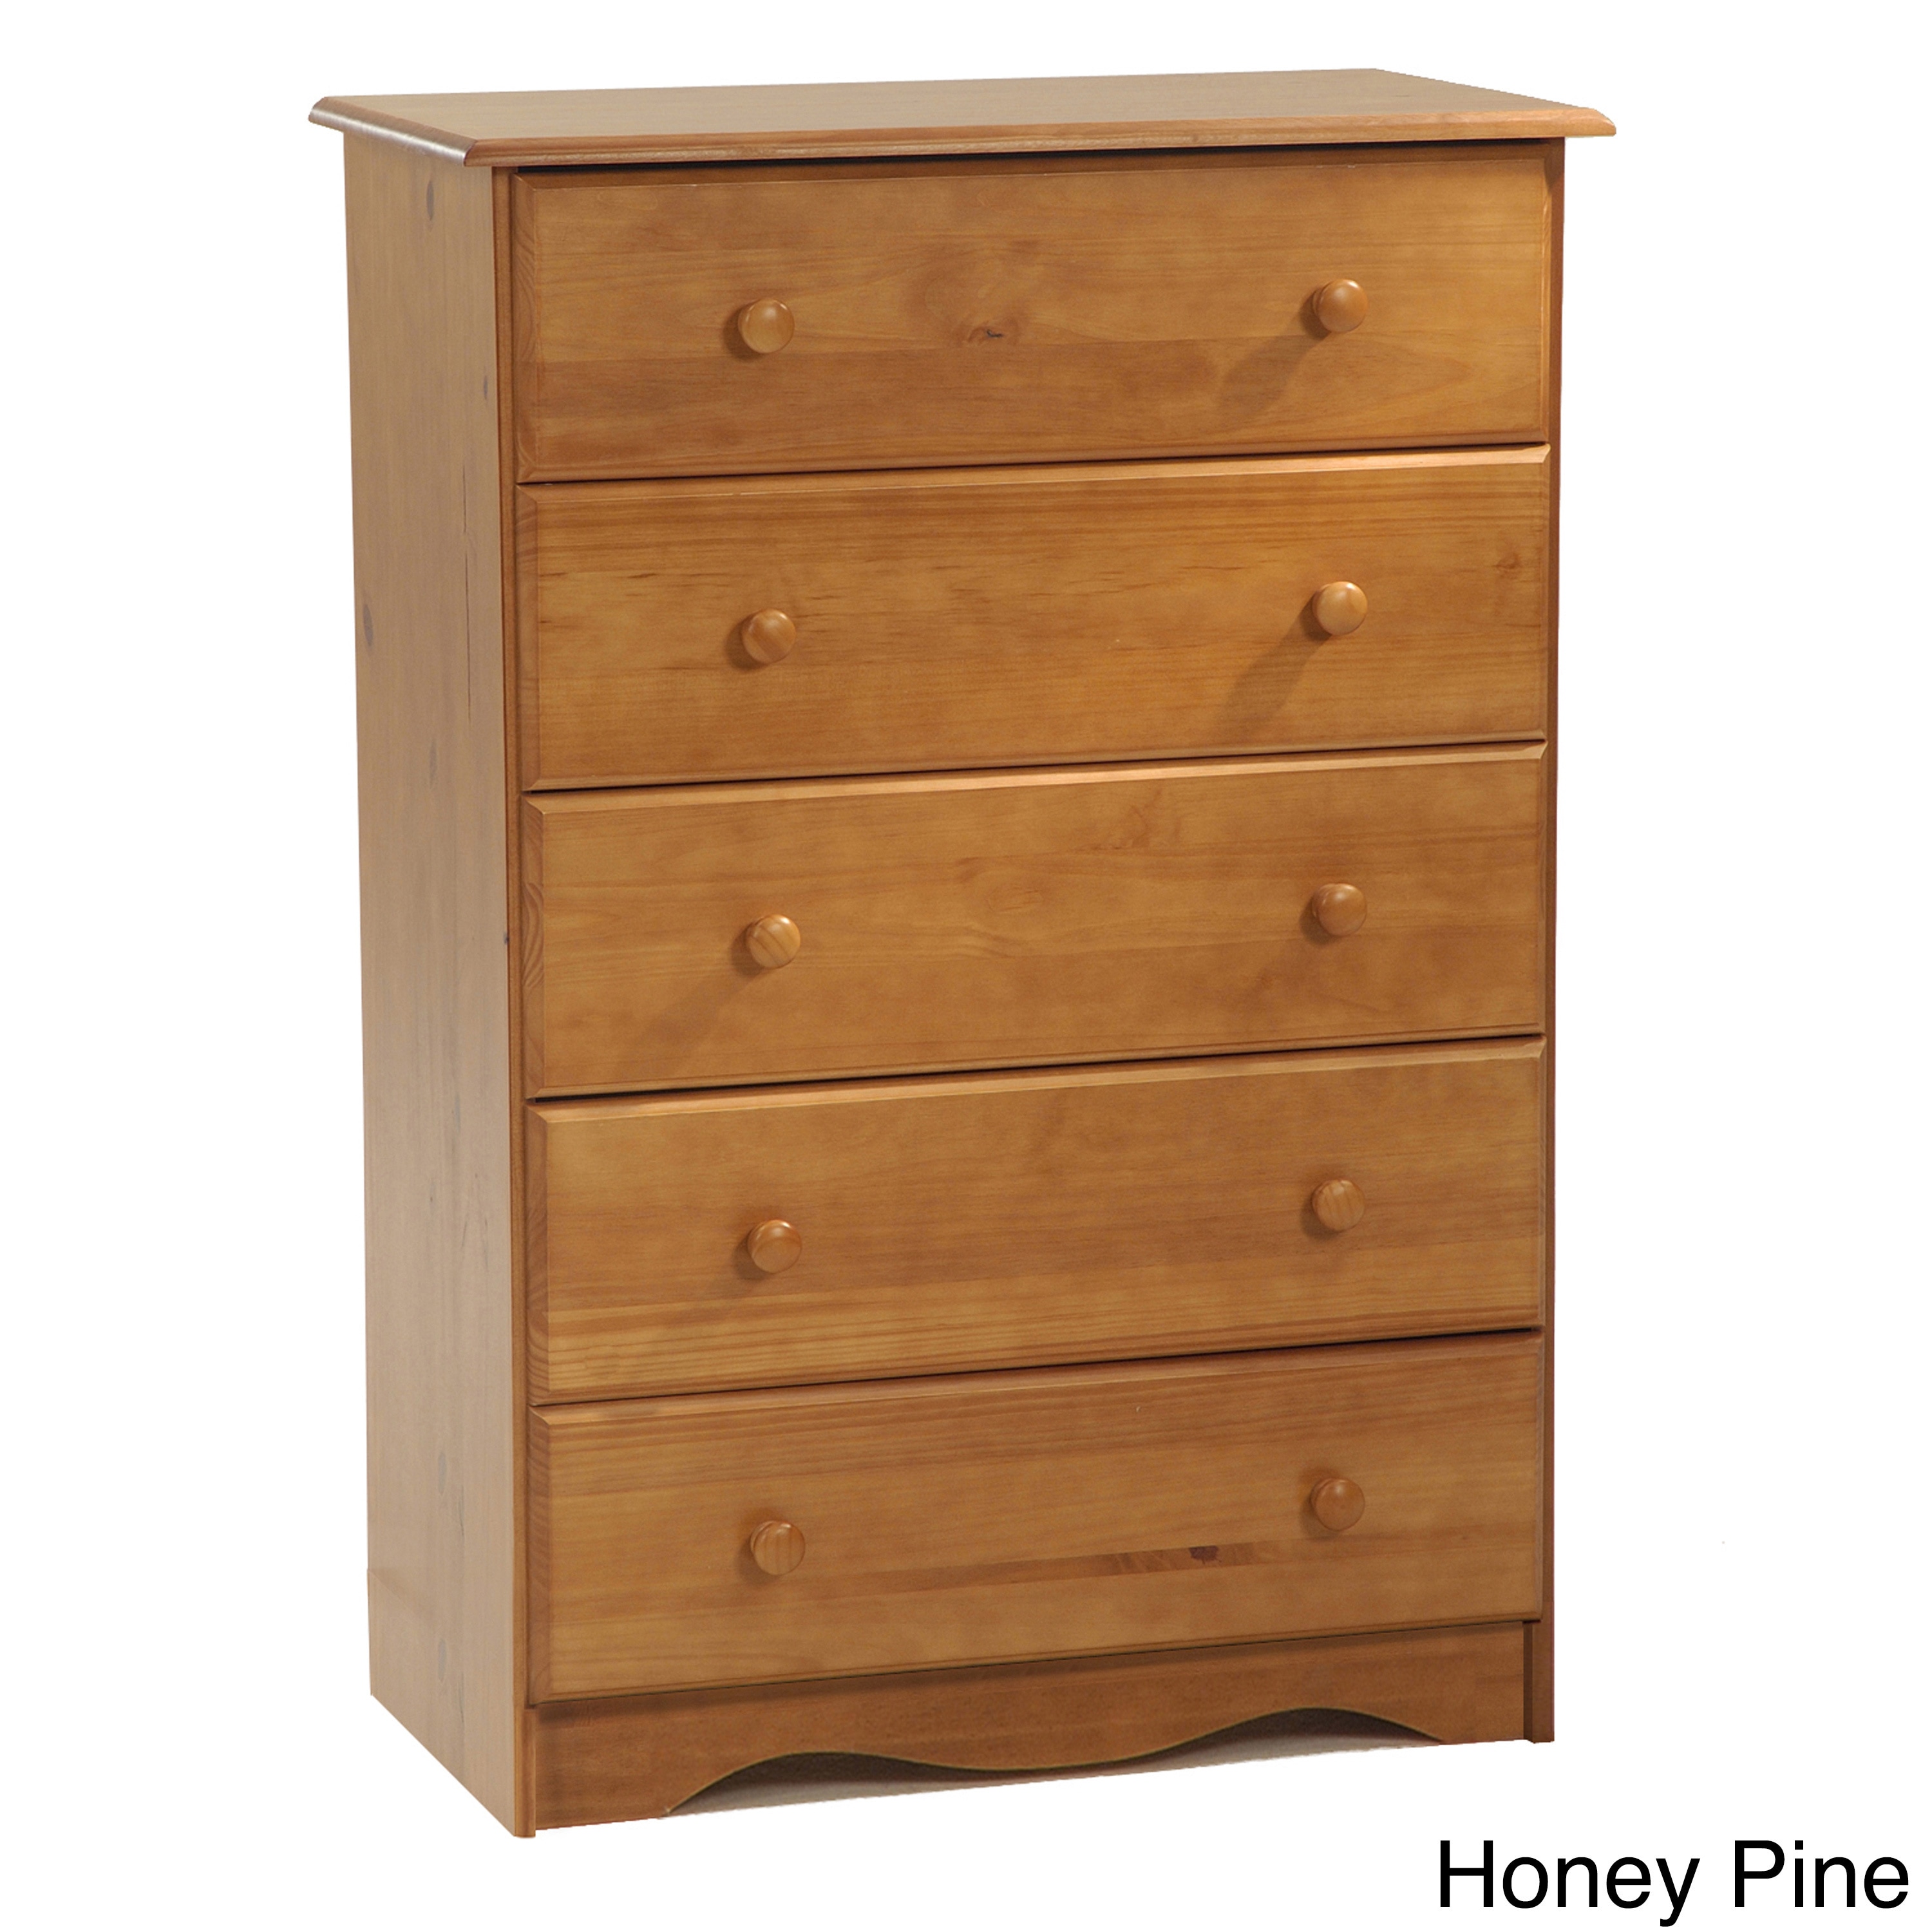 Palace Imports 100-percent Solid Wood 5-drawer Chest - Overstock™ Shopping - Great Deals on Dressers